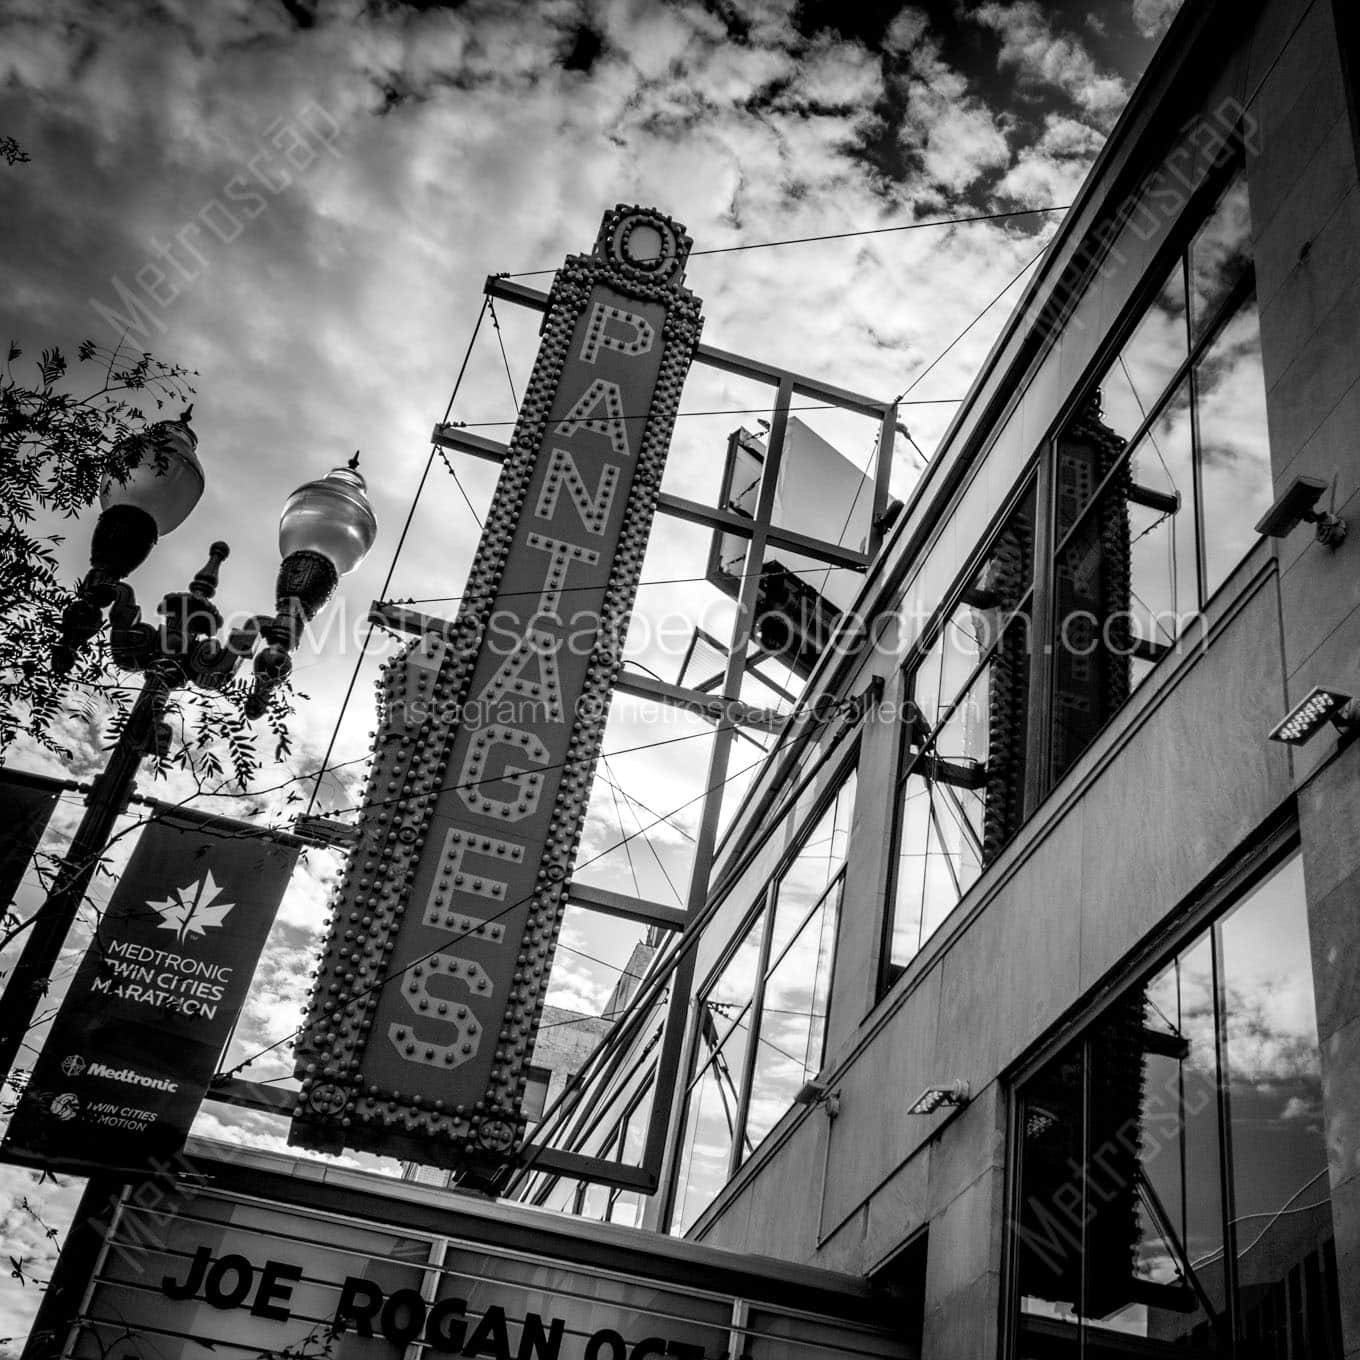 pantages theater sign Black & White Office Art